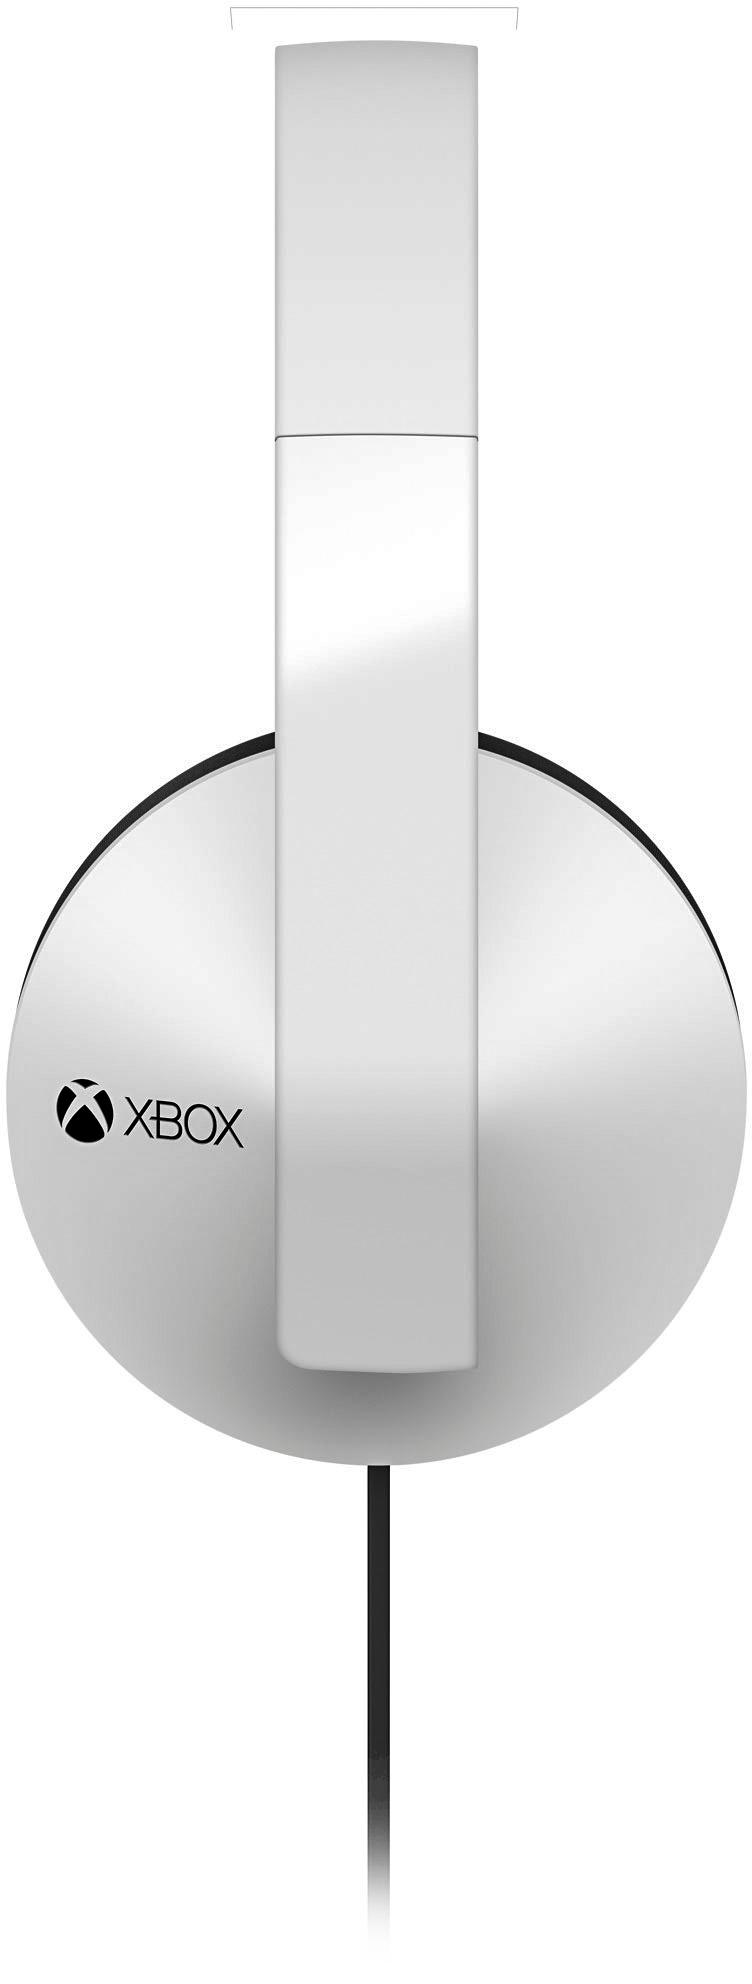 Mount Bank Gigante Comprensión Best Buy: Microsoft Xbox One Stereo Headset Special Edition White 5F4-00010